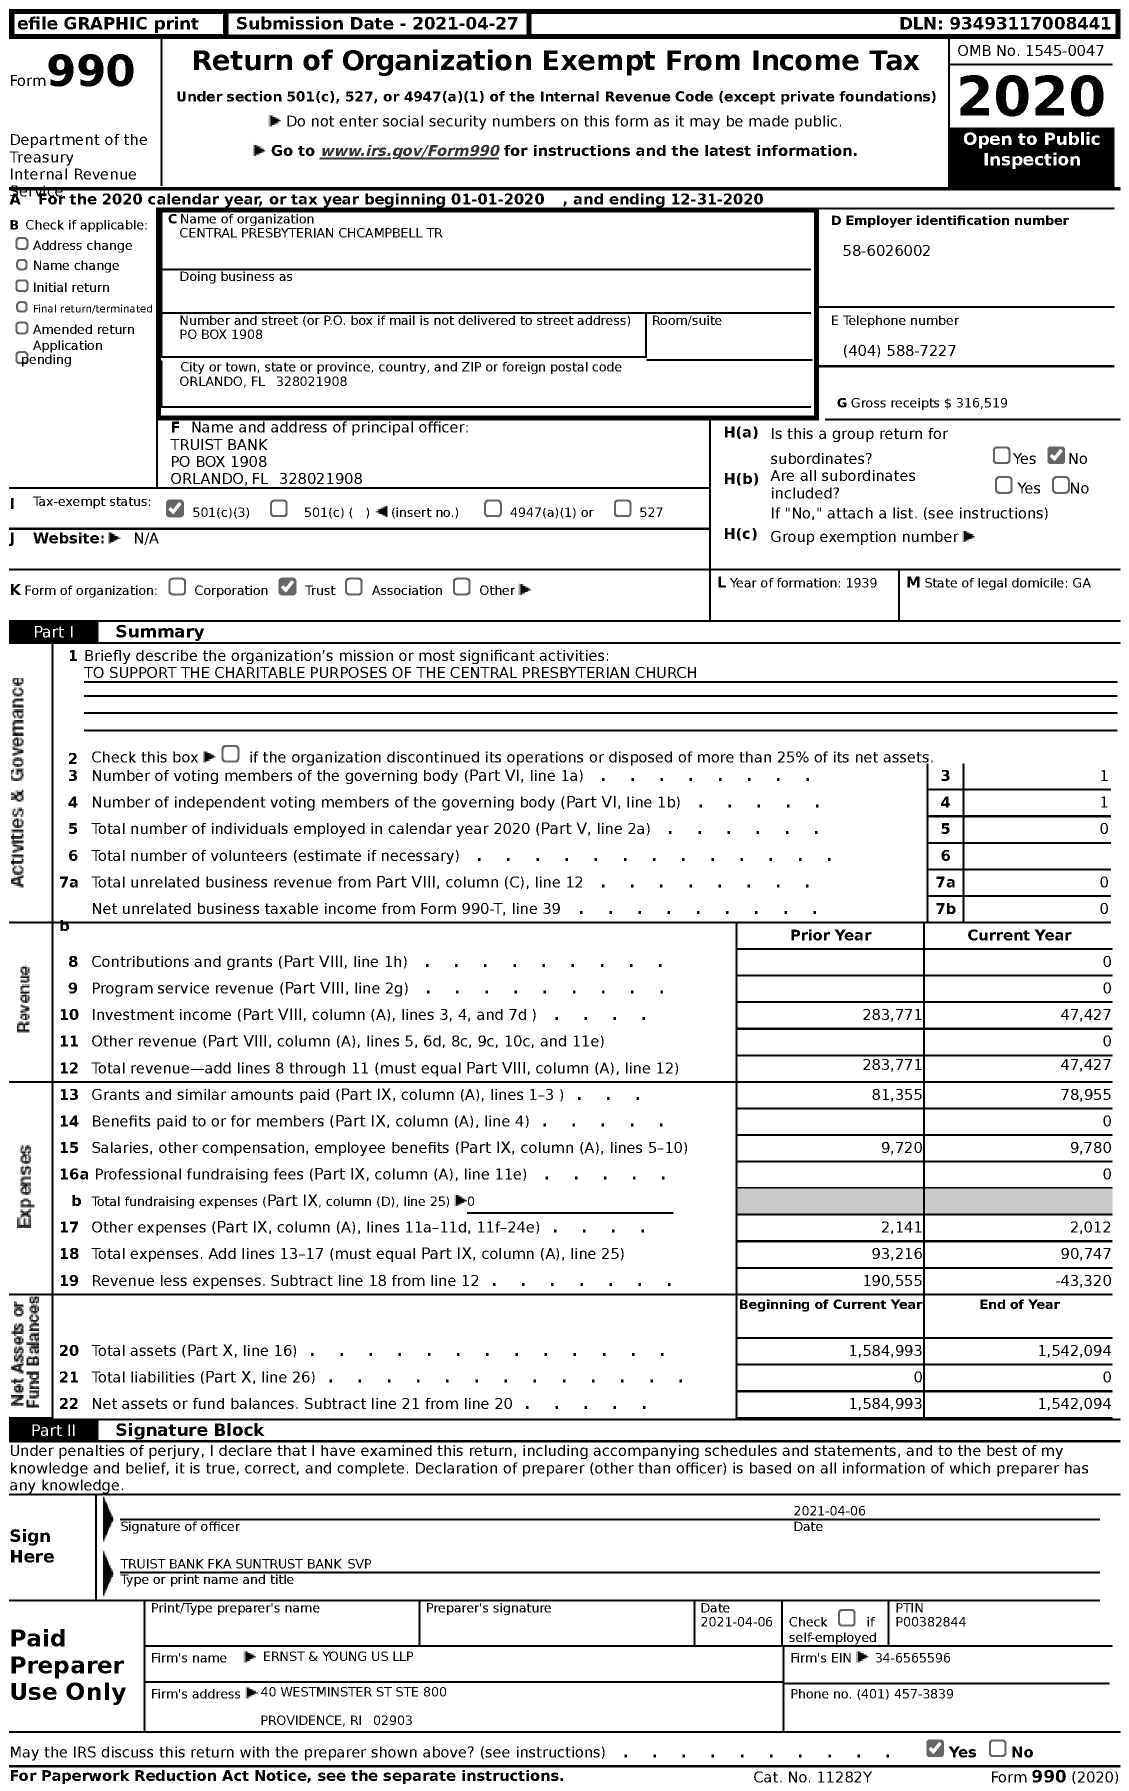 Image of first page of 2020 Form 990 for Central Presbyterian Chcampbell Trust